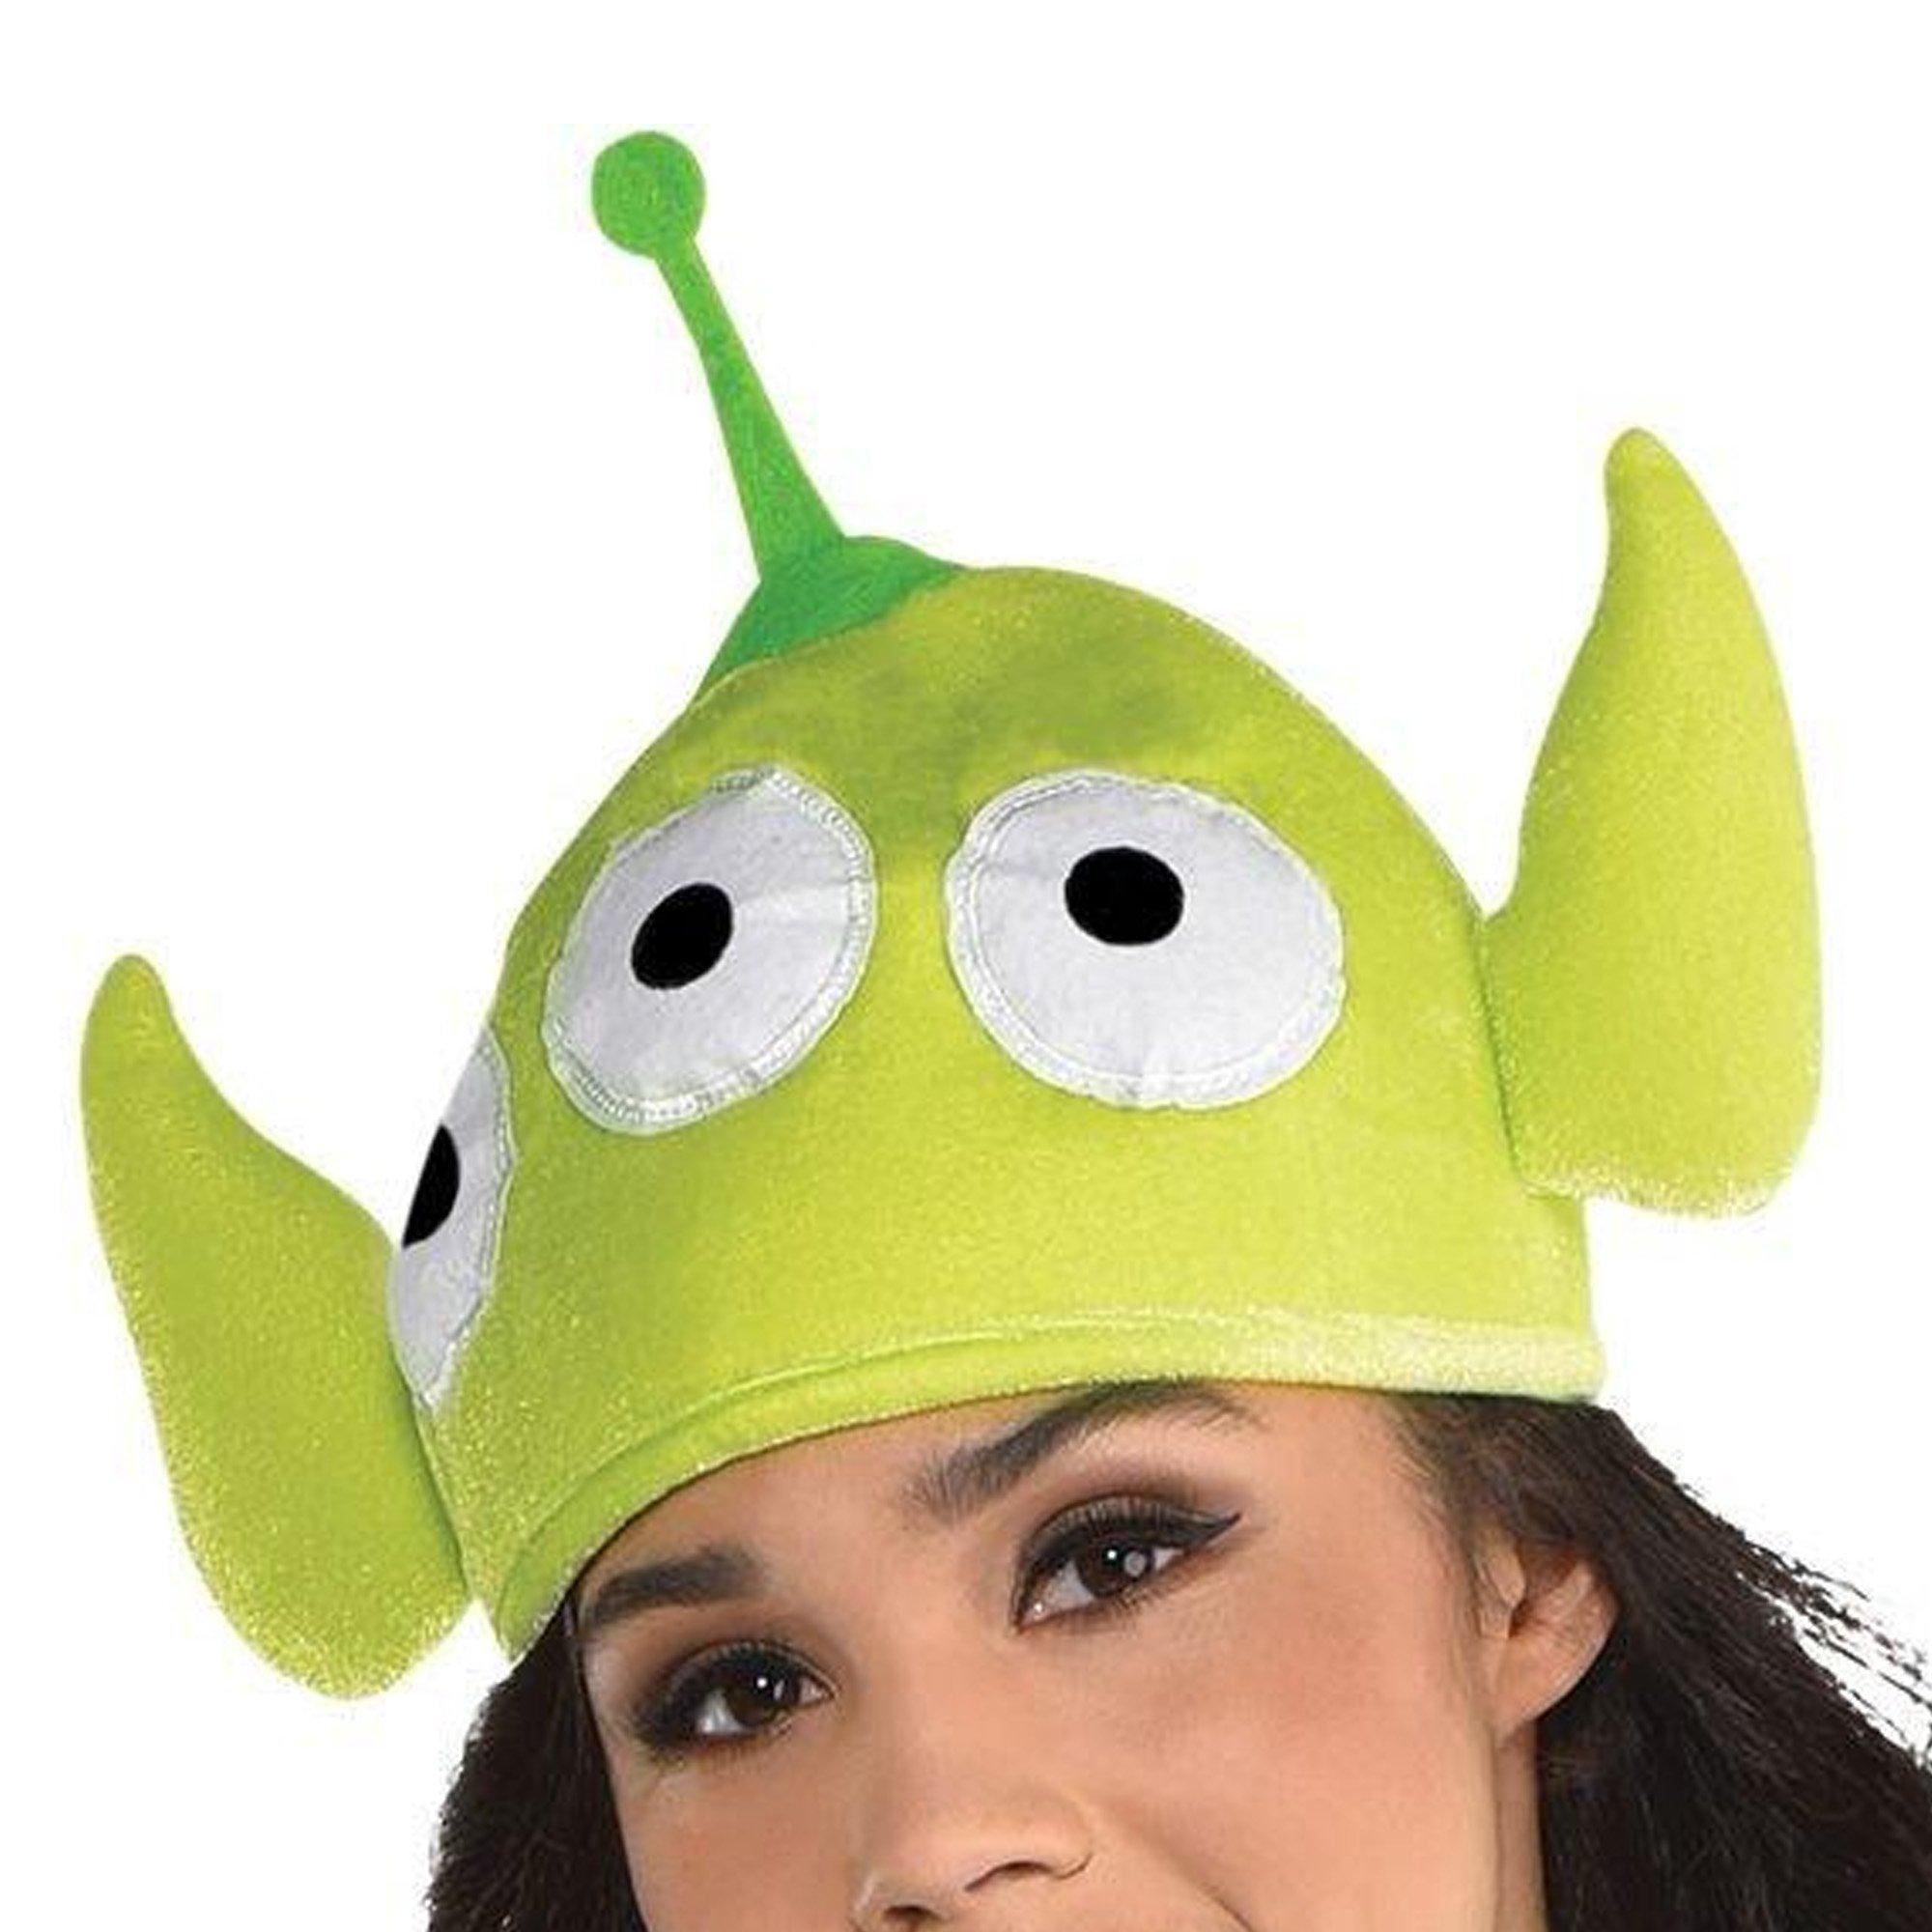 Alien Costume Accessory Kit - Toy Story 4